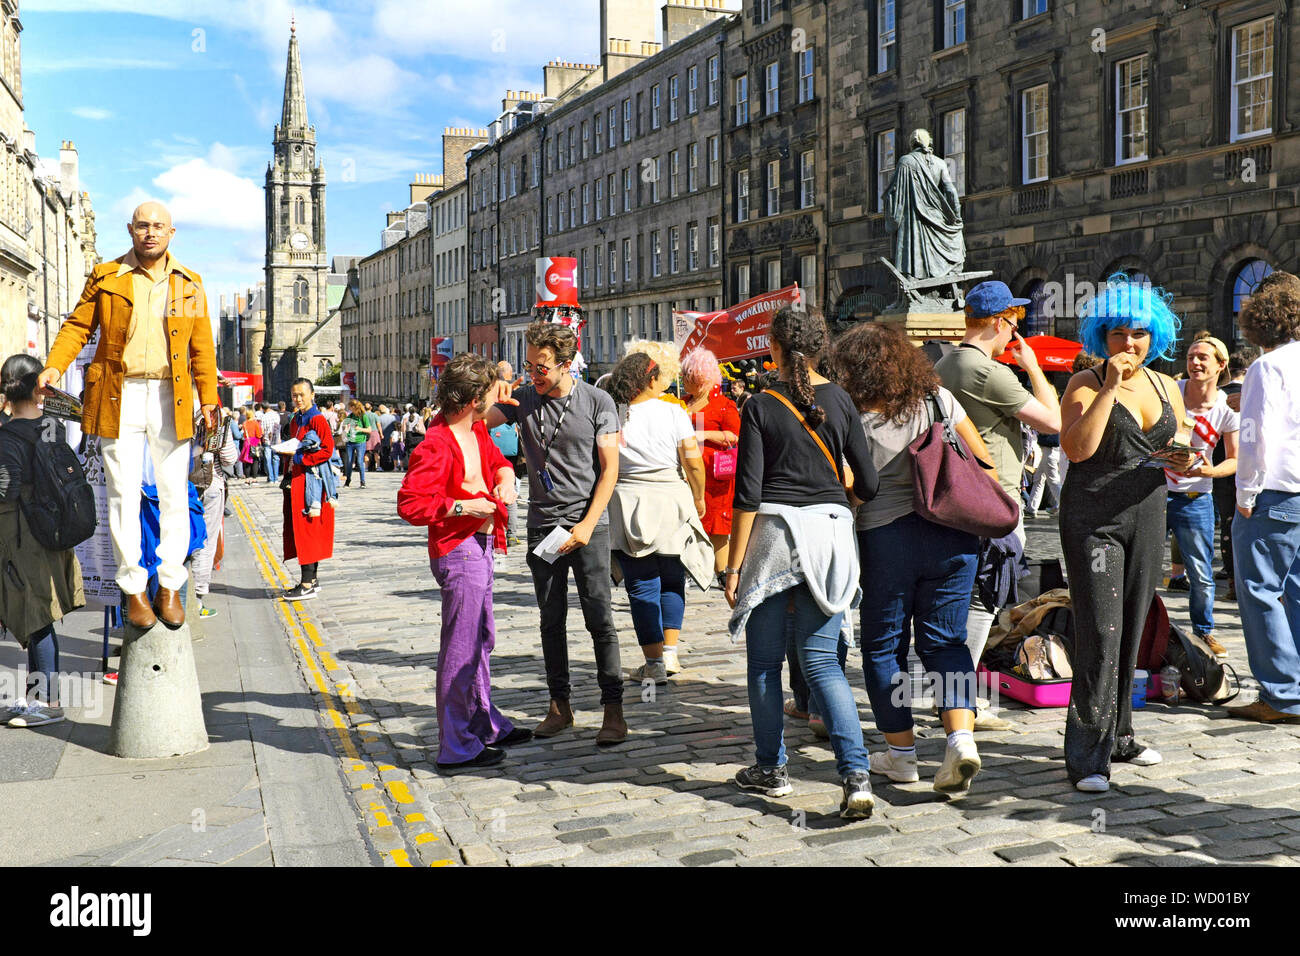 Tourists crowds on the streets of Edinburgh, Scotland during the 2016 Fringe Festival. Stock Photo